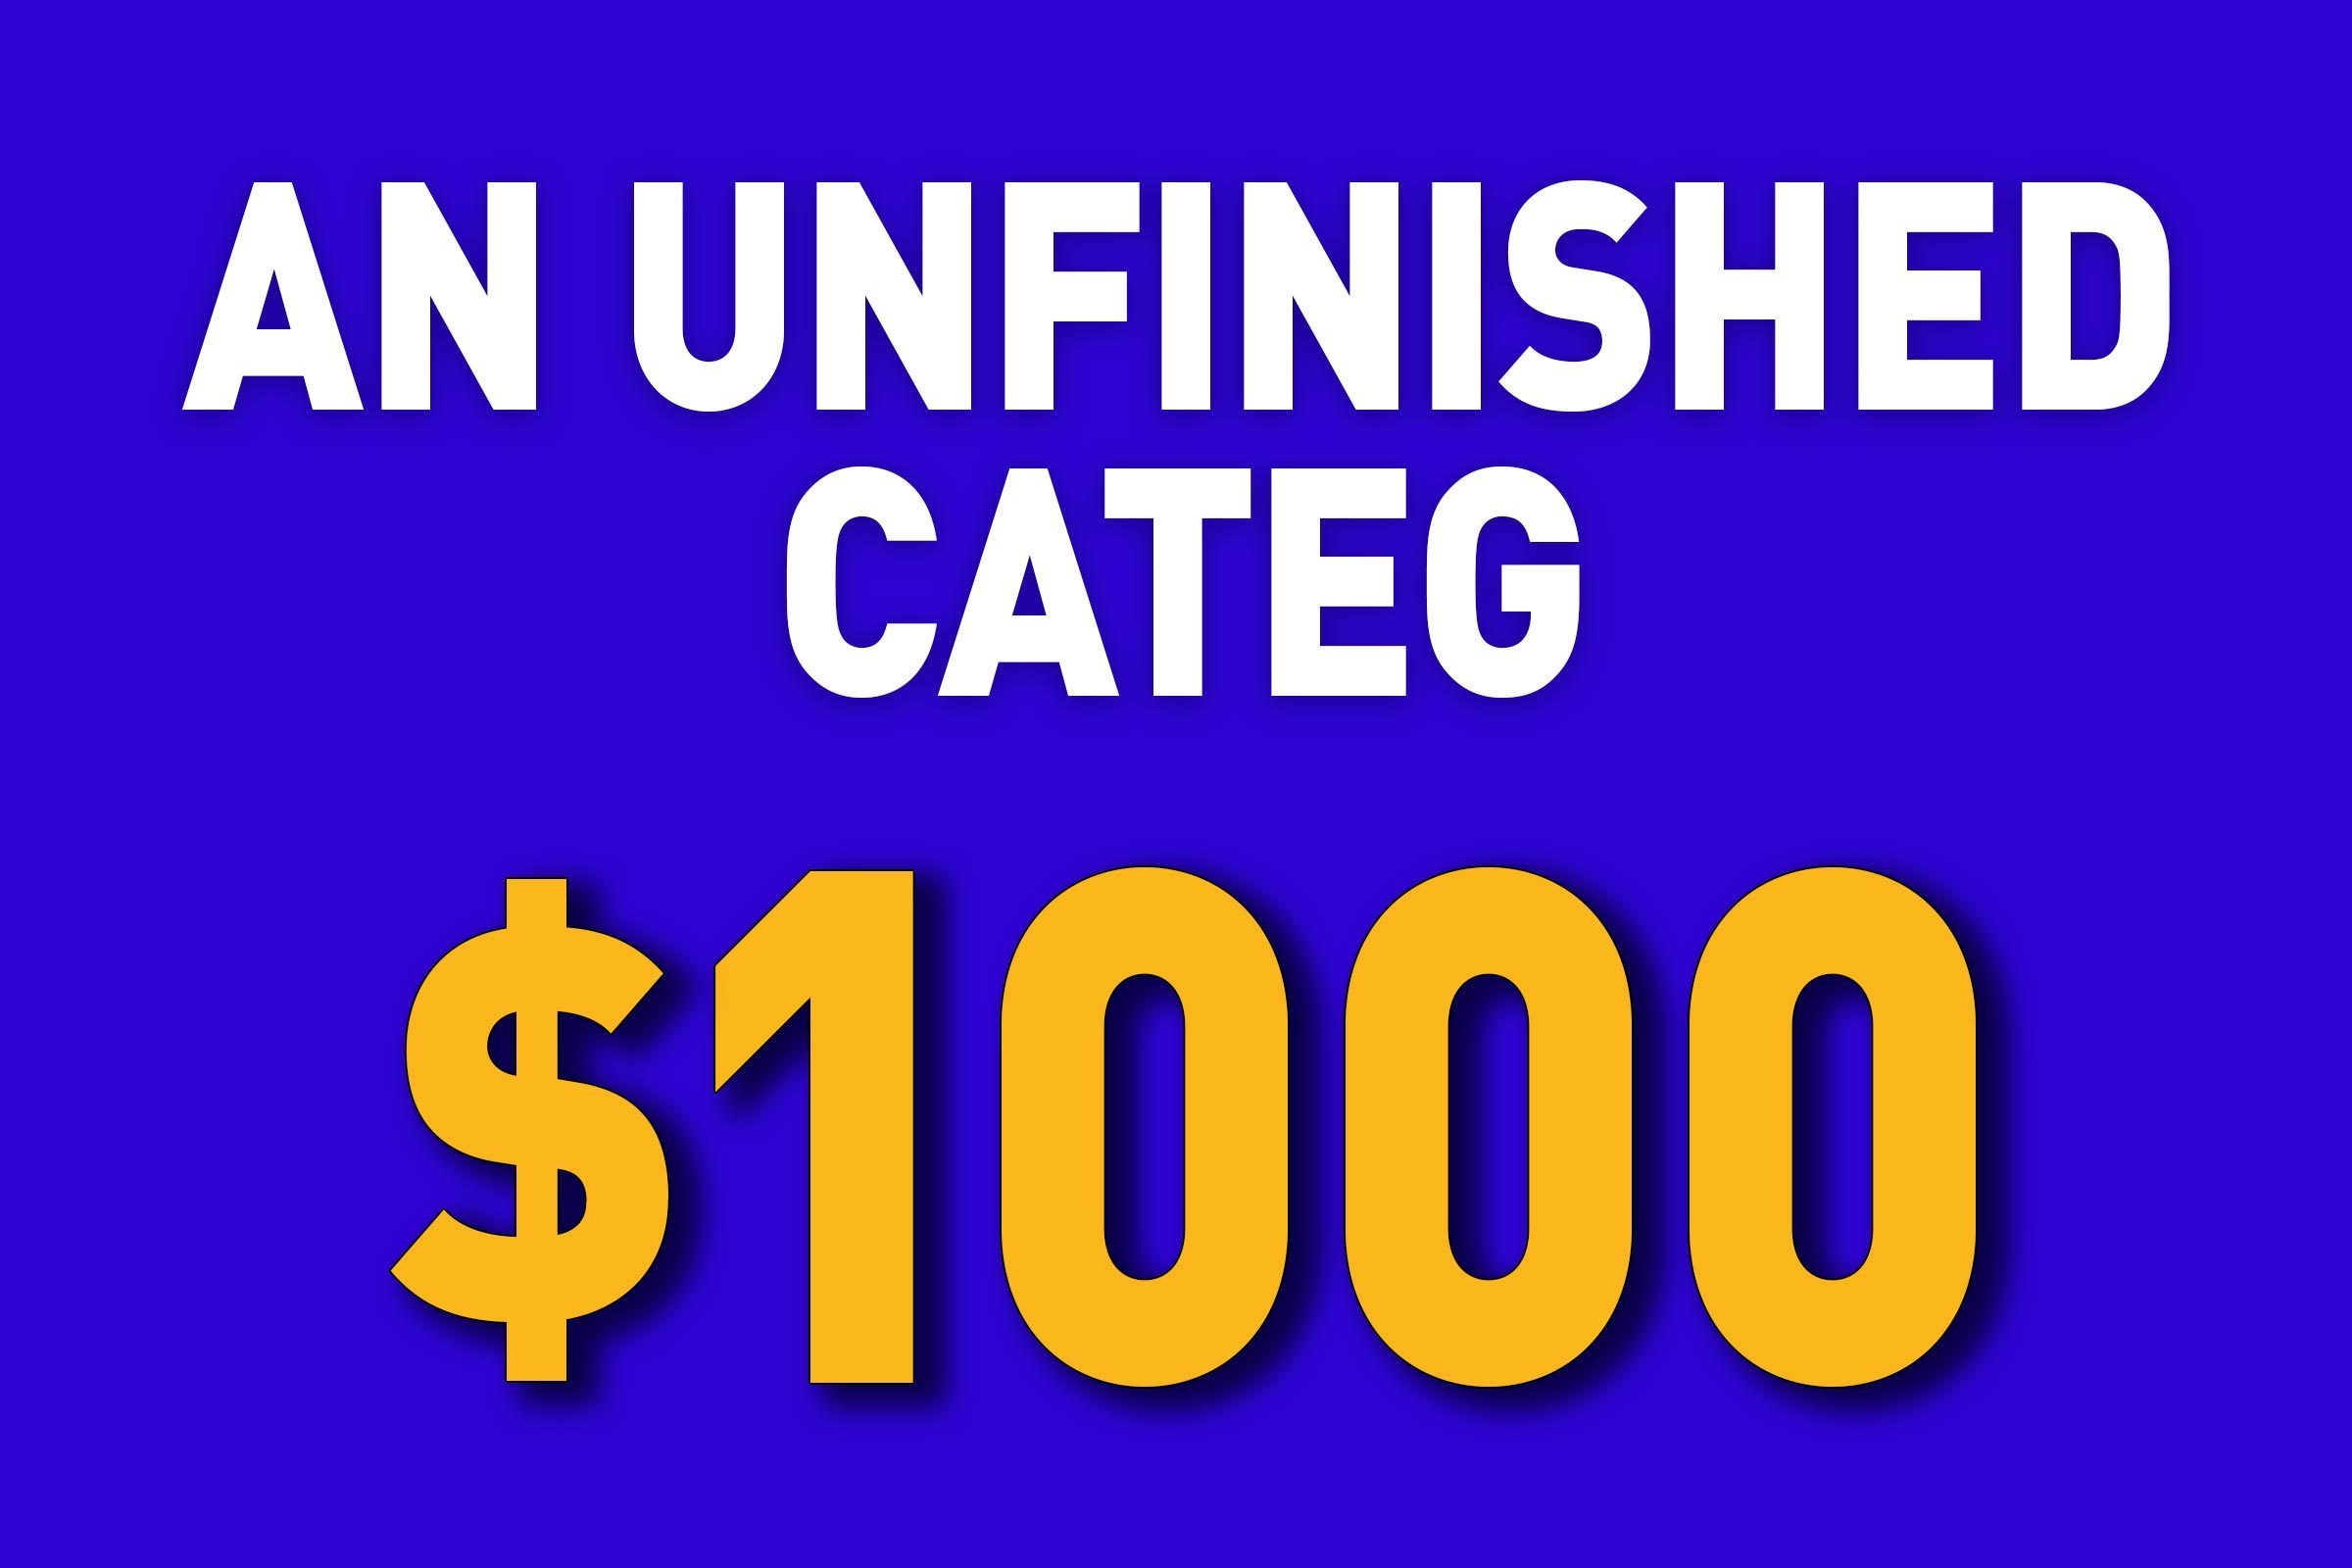 An Unfinished Categ for $1000